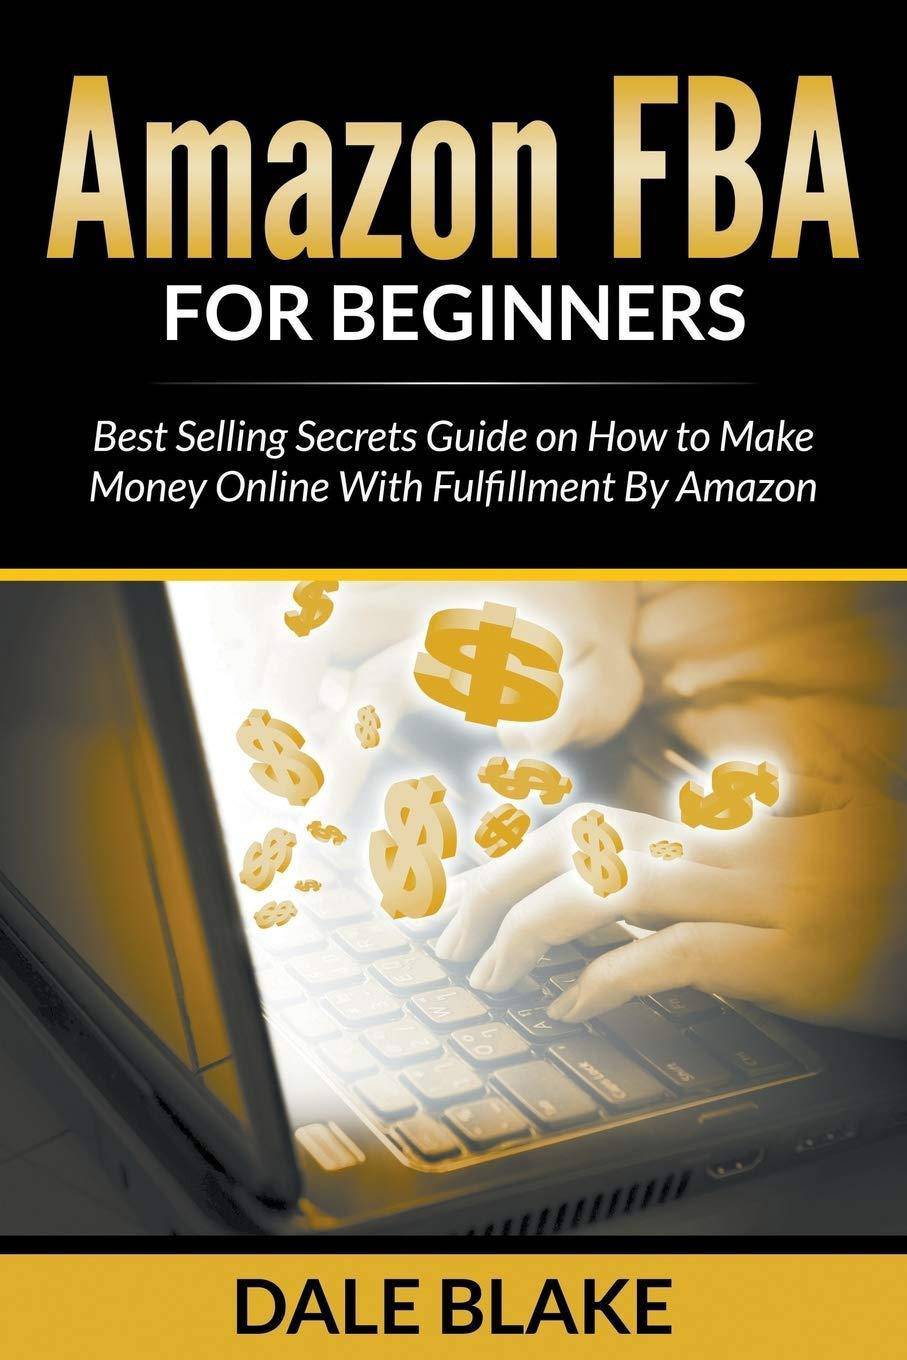 Amazon FBA For Beginners: Best Selling Secrets Guide on How to M - SureShot Books Publishing LLC